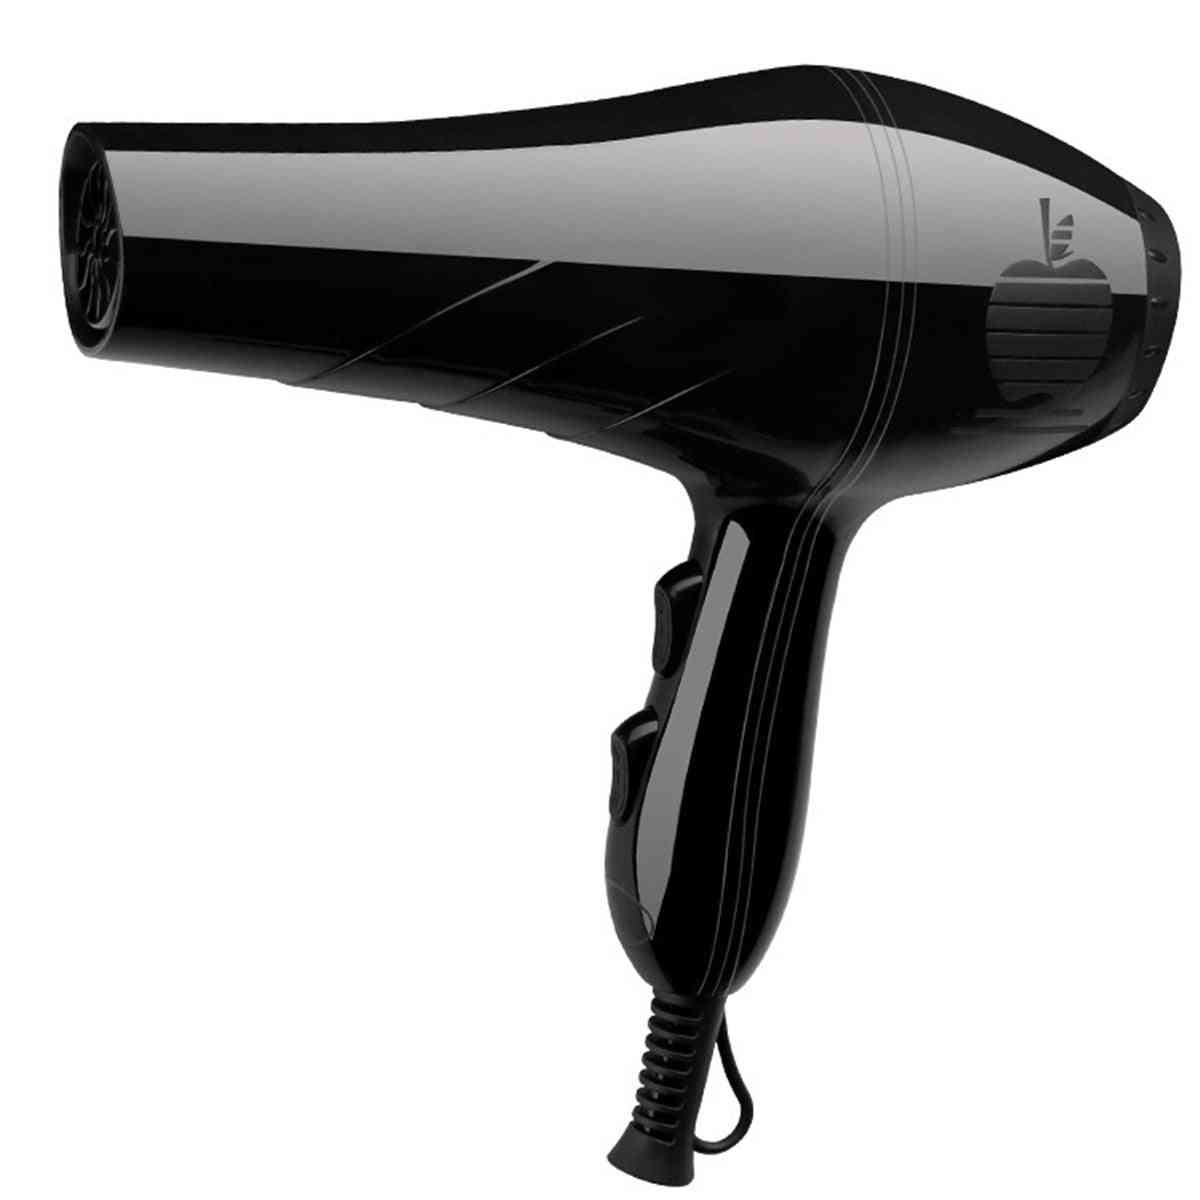 Profession Hairdressing Ionic Blow, 2000w Electric Salon Hair Dryer